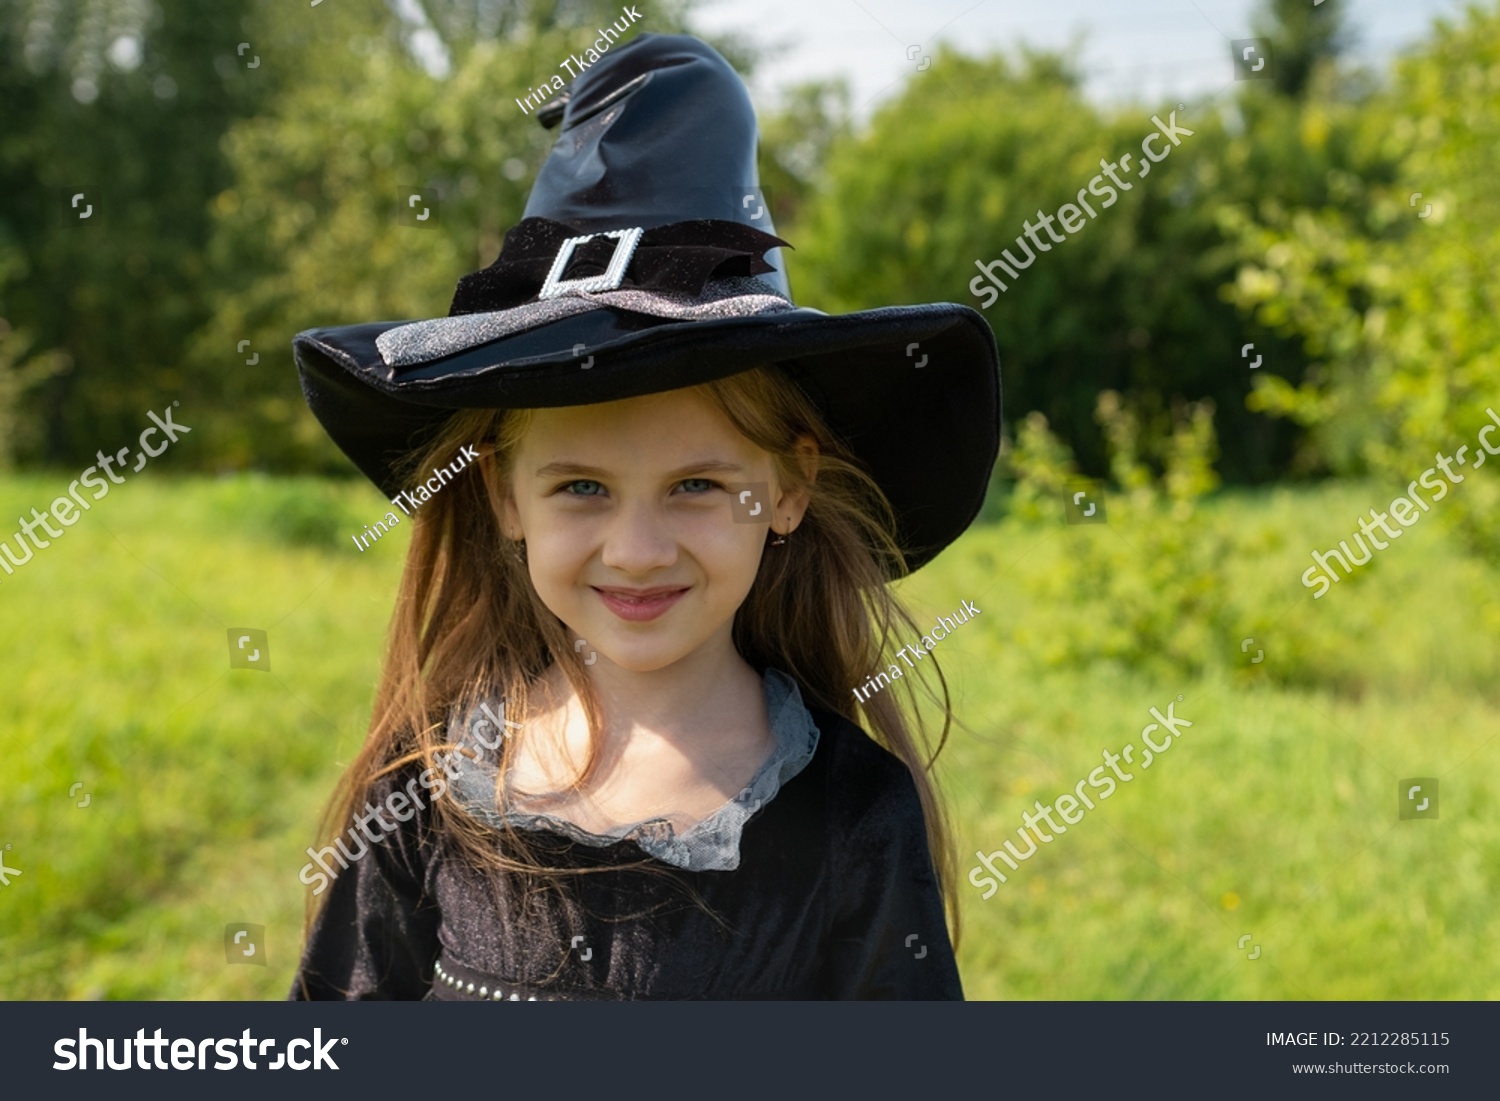 Halloween girl going to collect candy. Trick-or-treating. Guising. Jack-o-lantern. Child in carnival costume witch outdoors. Celebrate halloween. Girl in forest smiling and holding basket of sweets. #2212285115